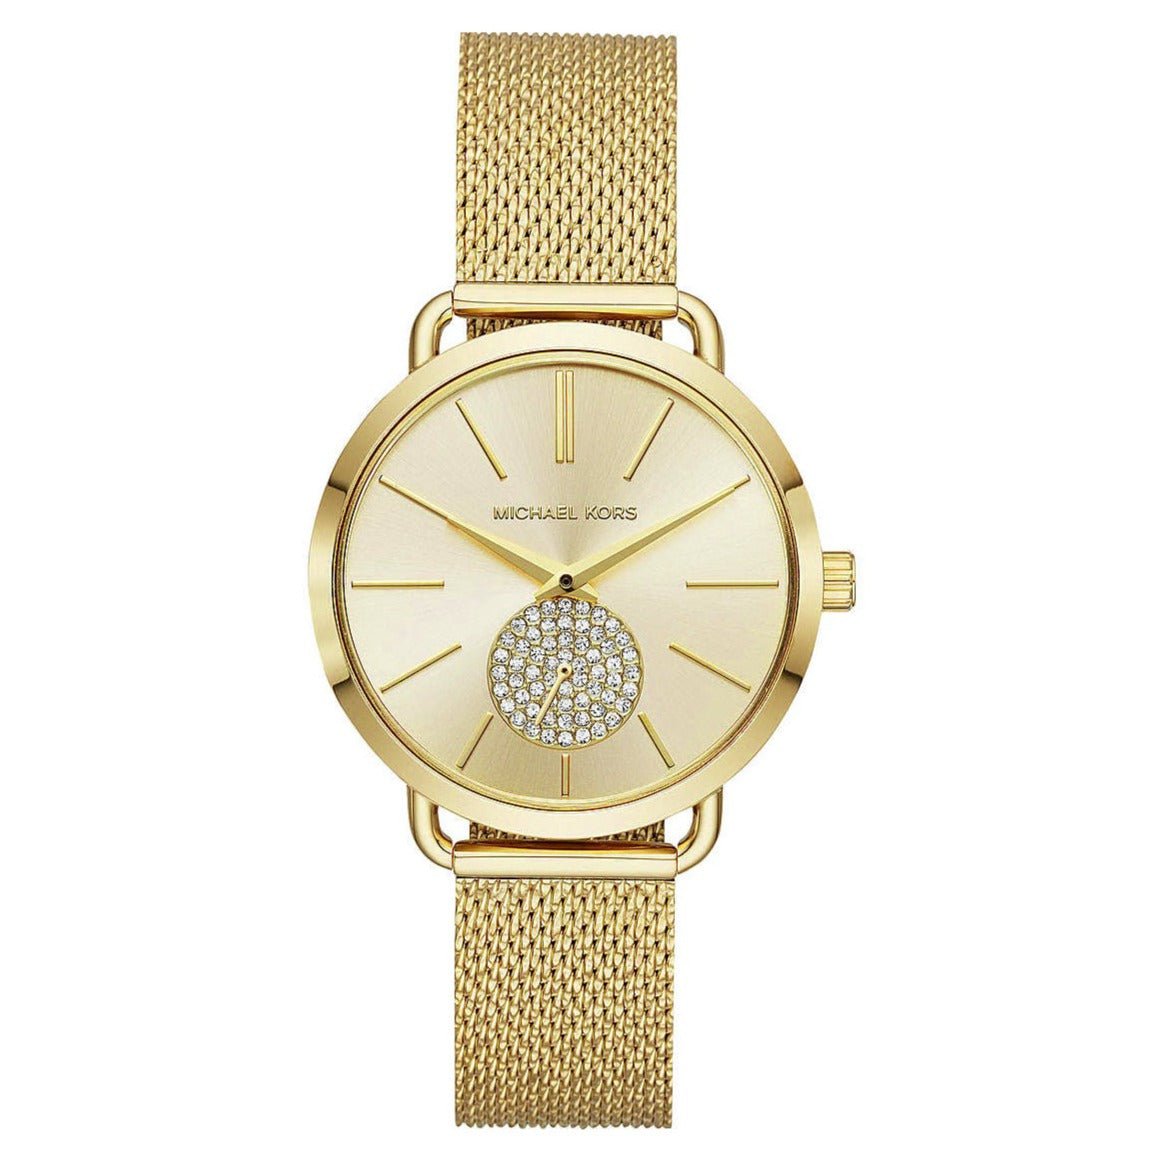 Michael Kors Ladies Watch Portia Yellow Gold Crystal MK3844 - Watches & Crystals